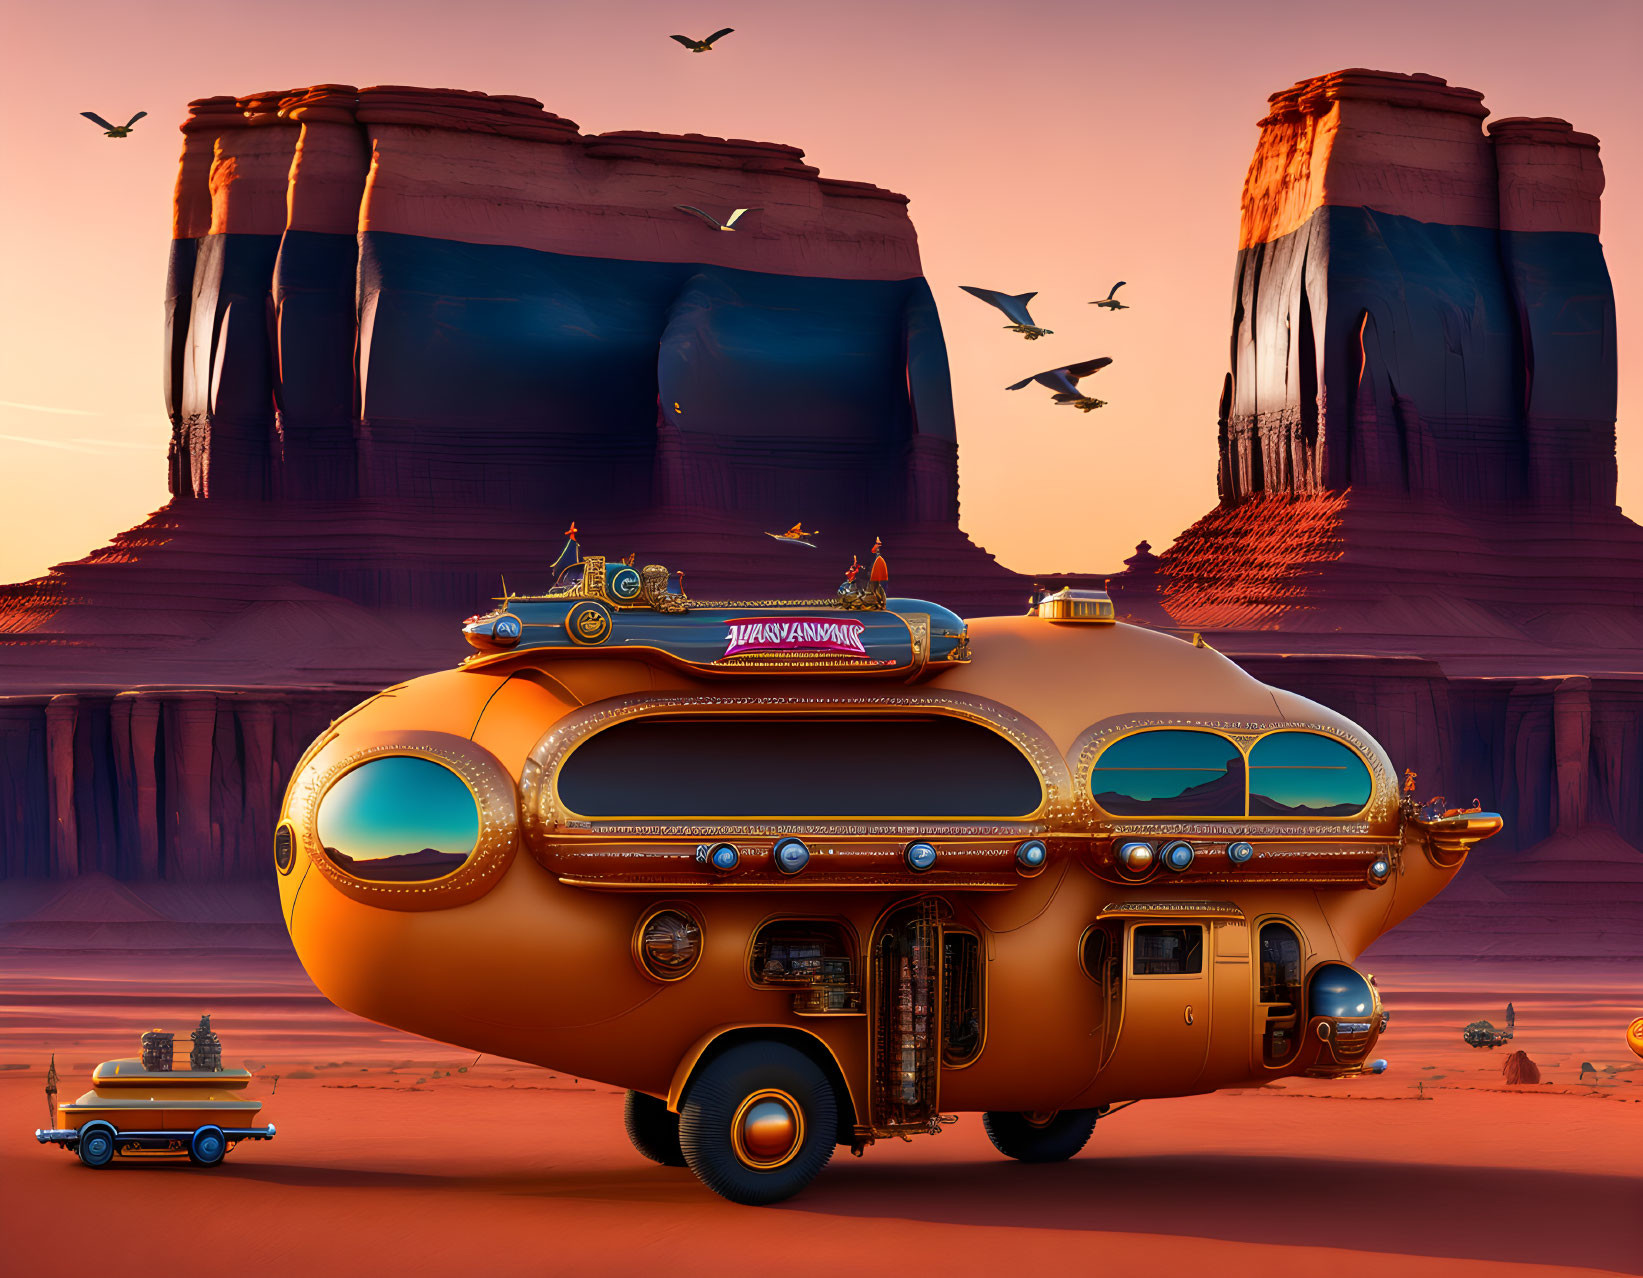 Yellow submarine-shaped bus in desert with red rocks and birds.